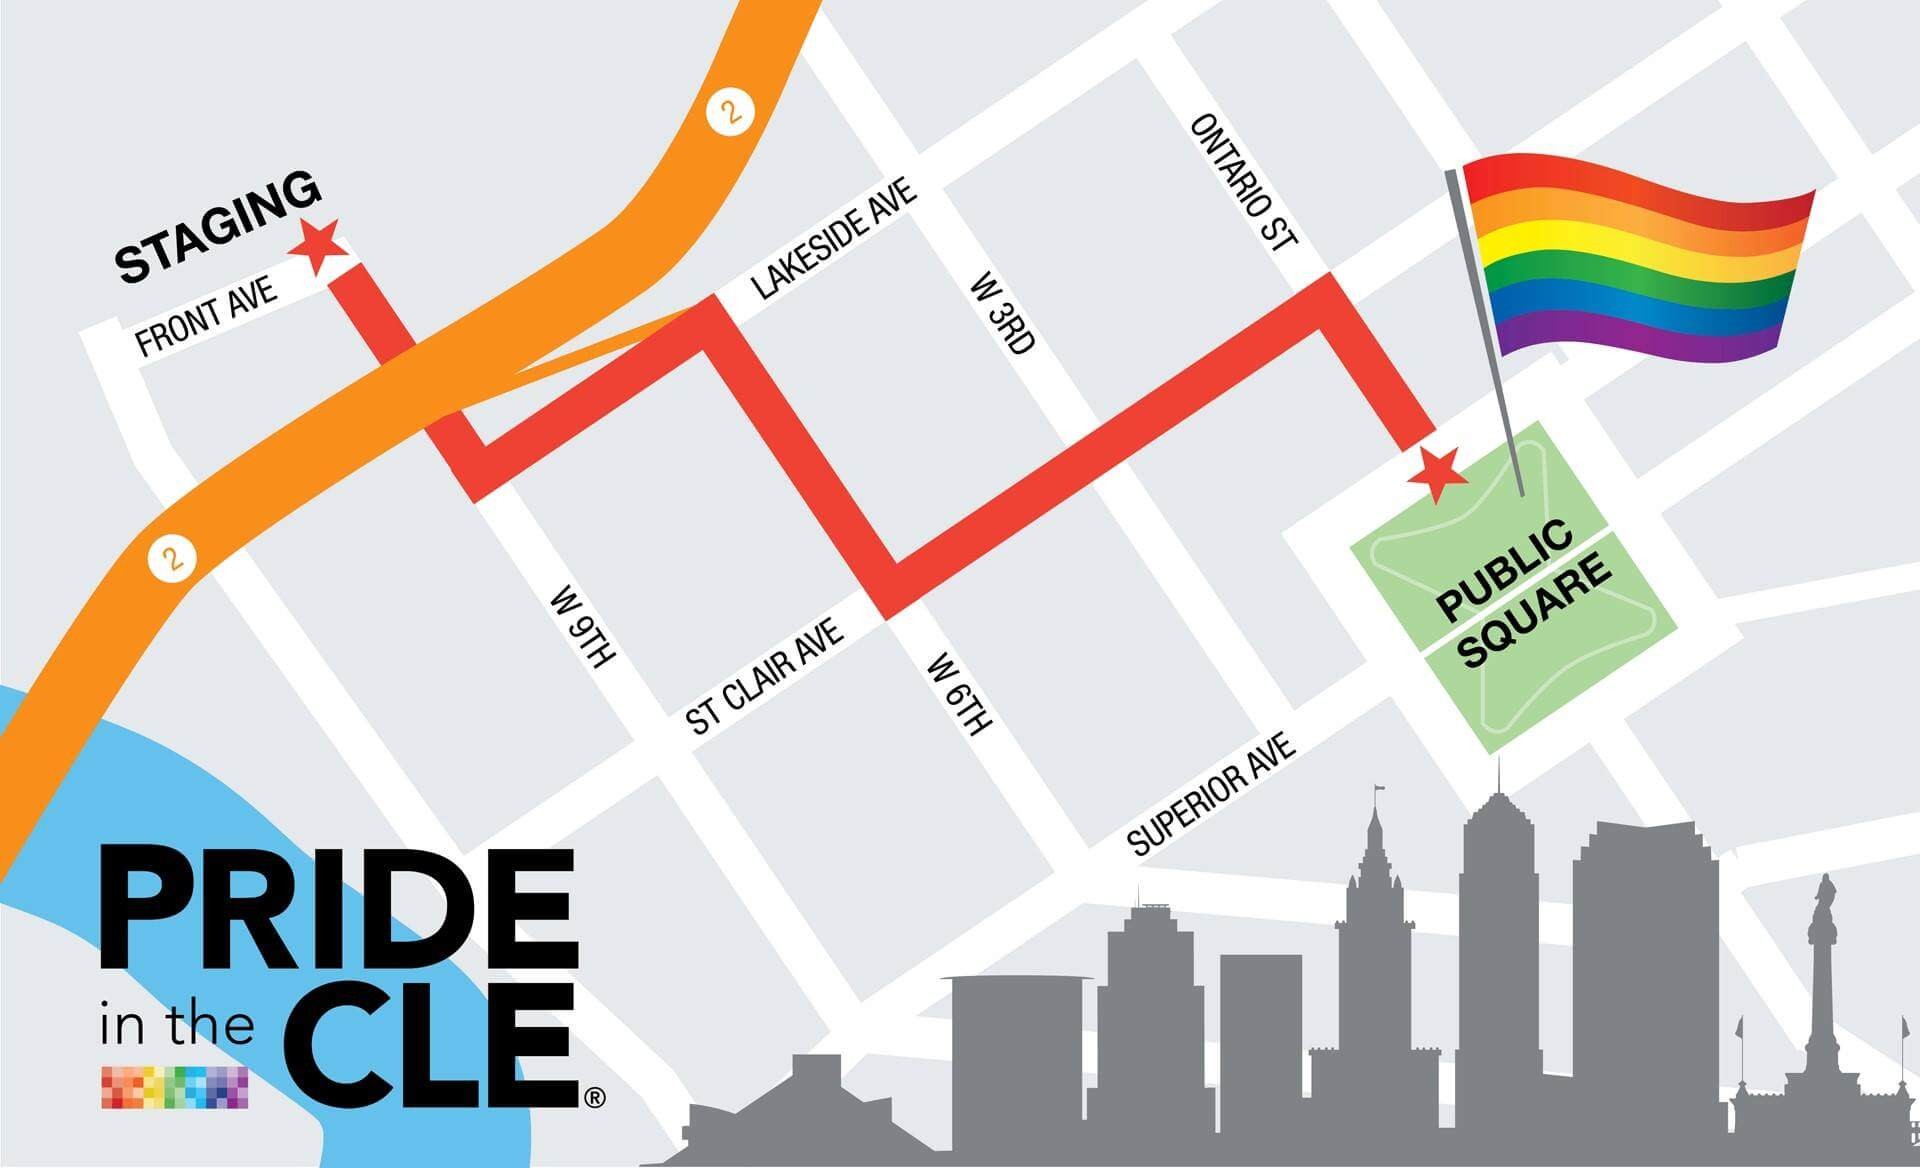 Your Guide to the Pride in the CLE Parade and Celebration This Weekend